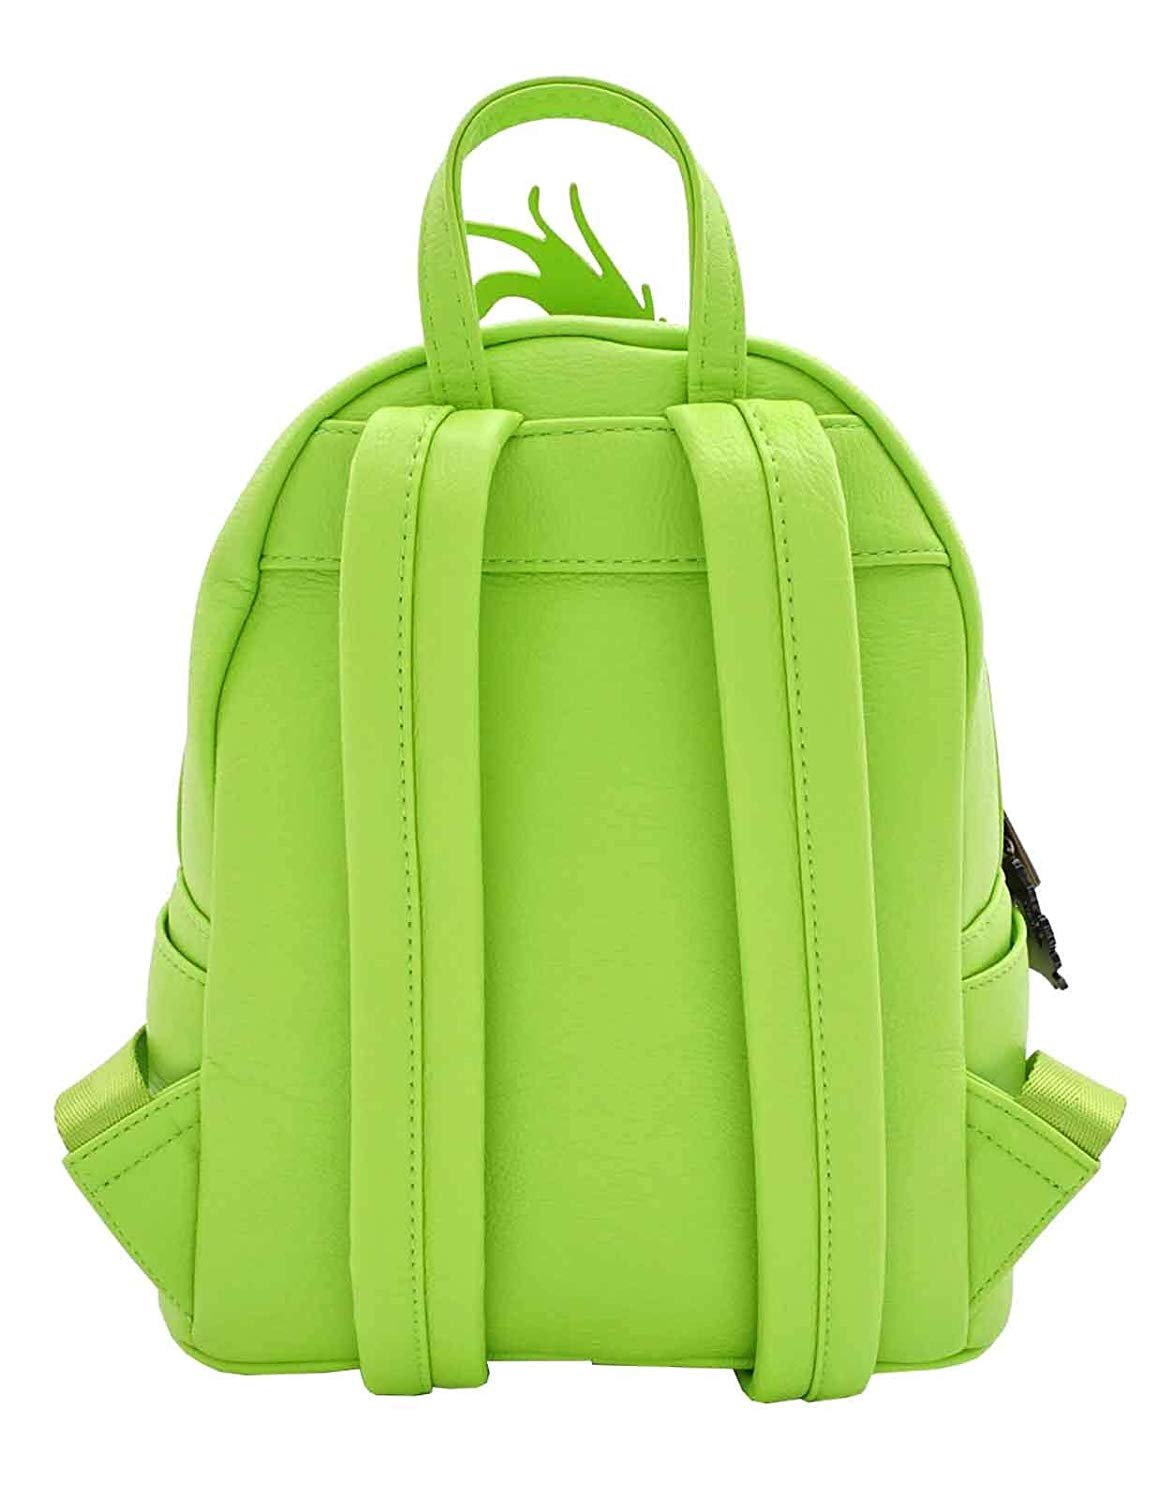 Loungefly Dr. Seuss The Grinch Faux Leather Mini Backpack